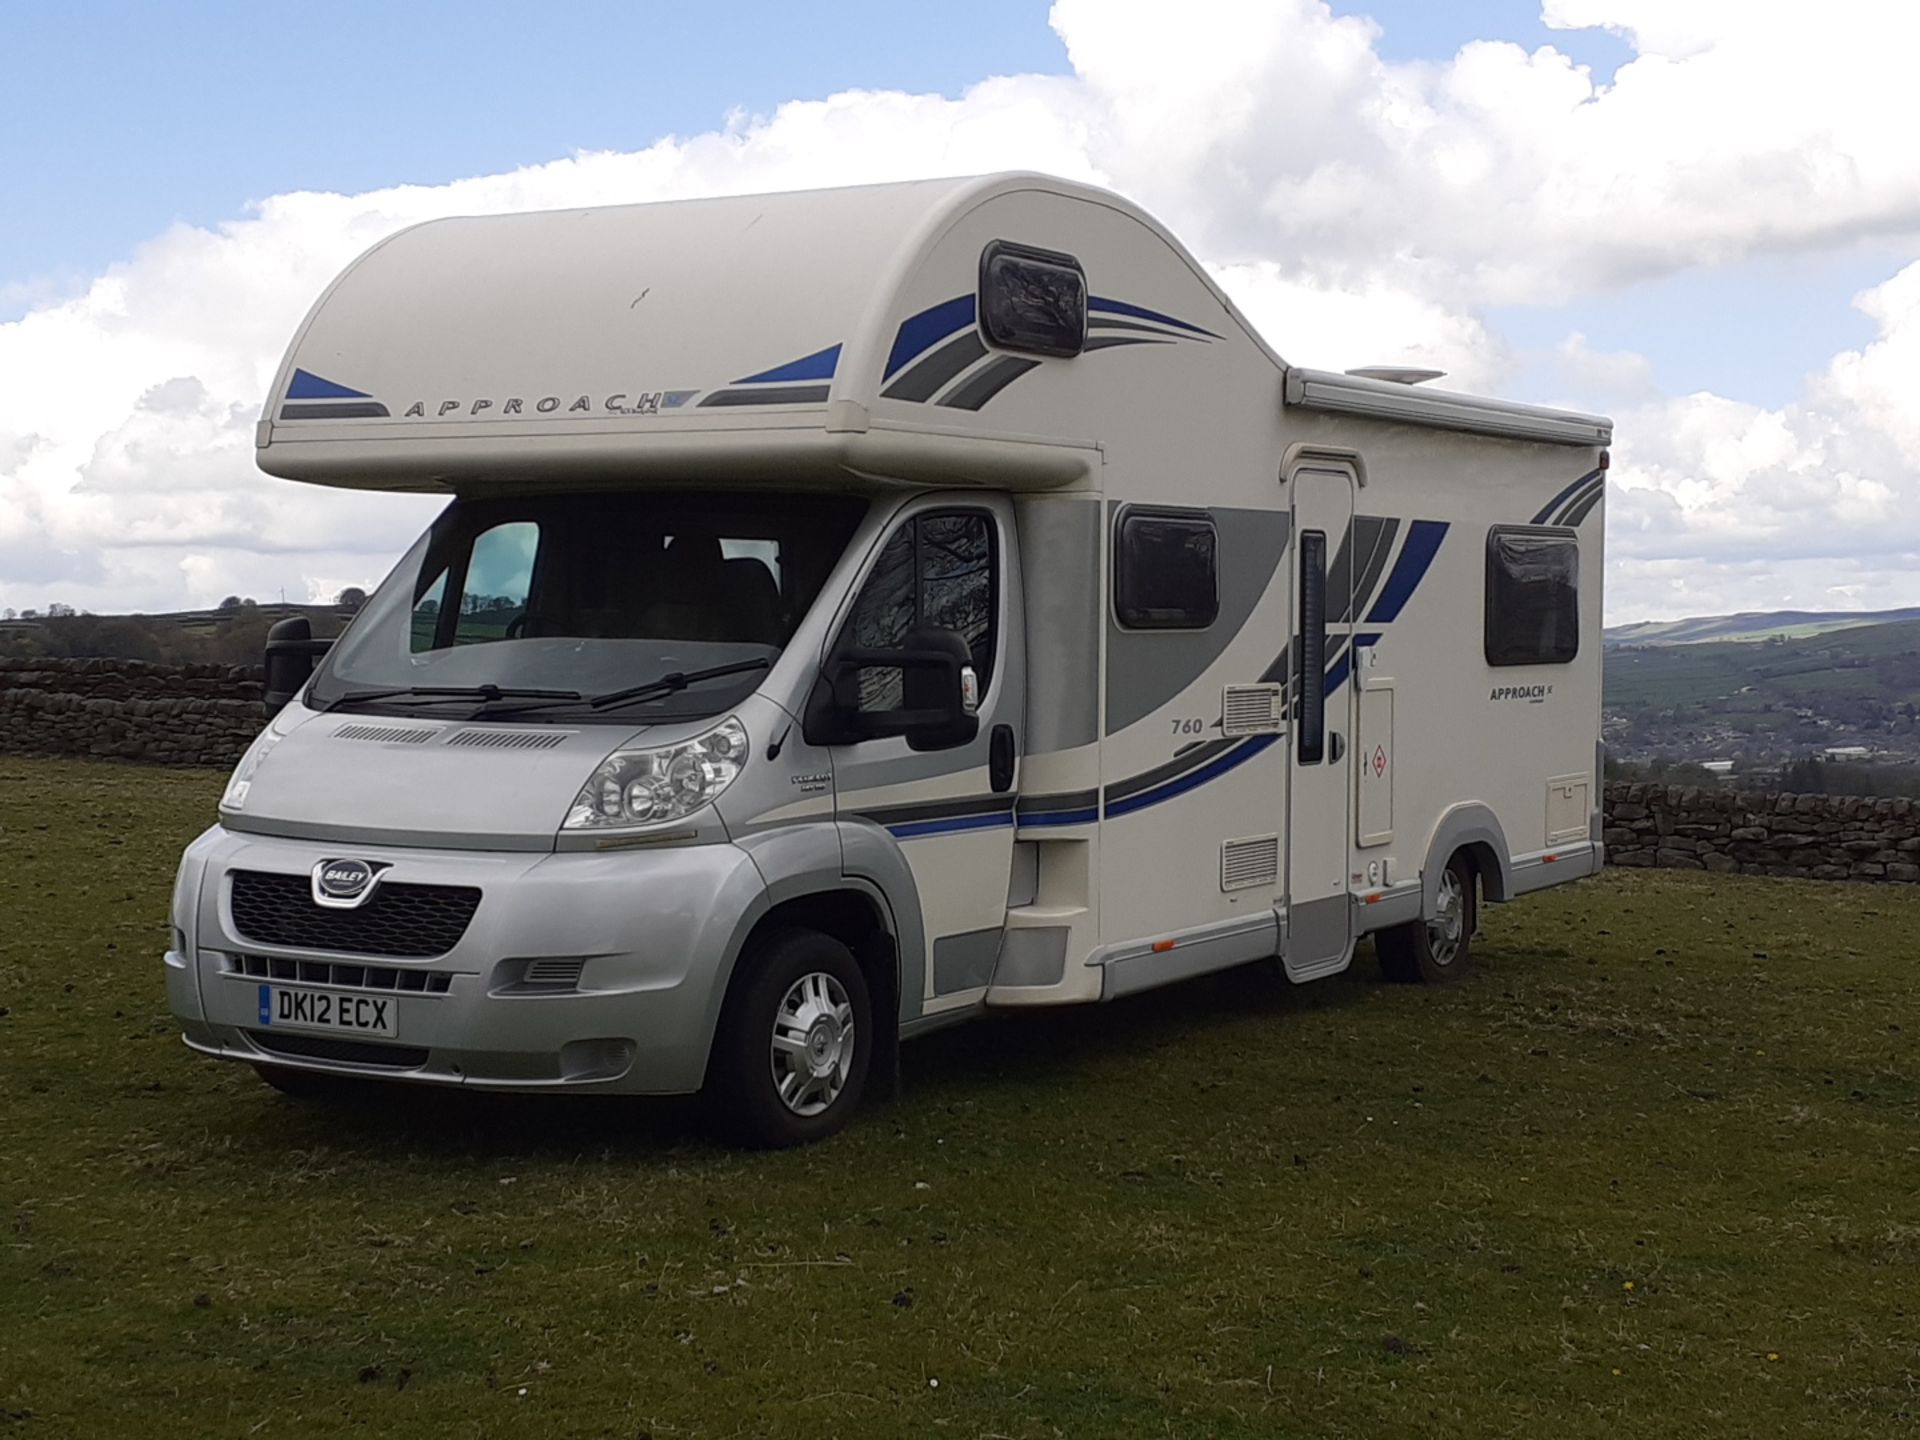 2012 BAILEY APPROACH 760 SE LUXURY 6 BERTH MOTORHOME £10K OF EXTRAS, 30,000 MILES FROM NEW - Image 4 of 31